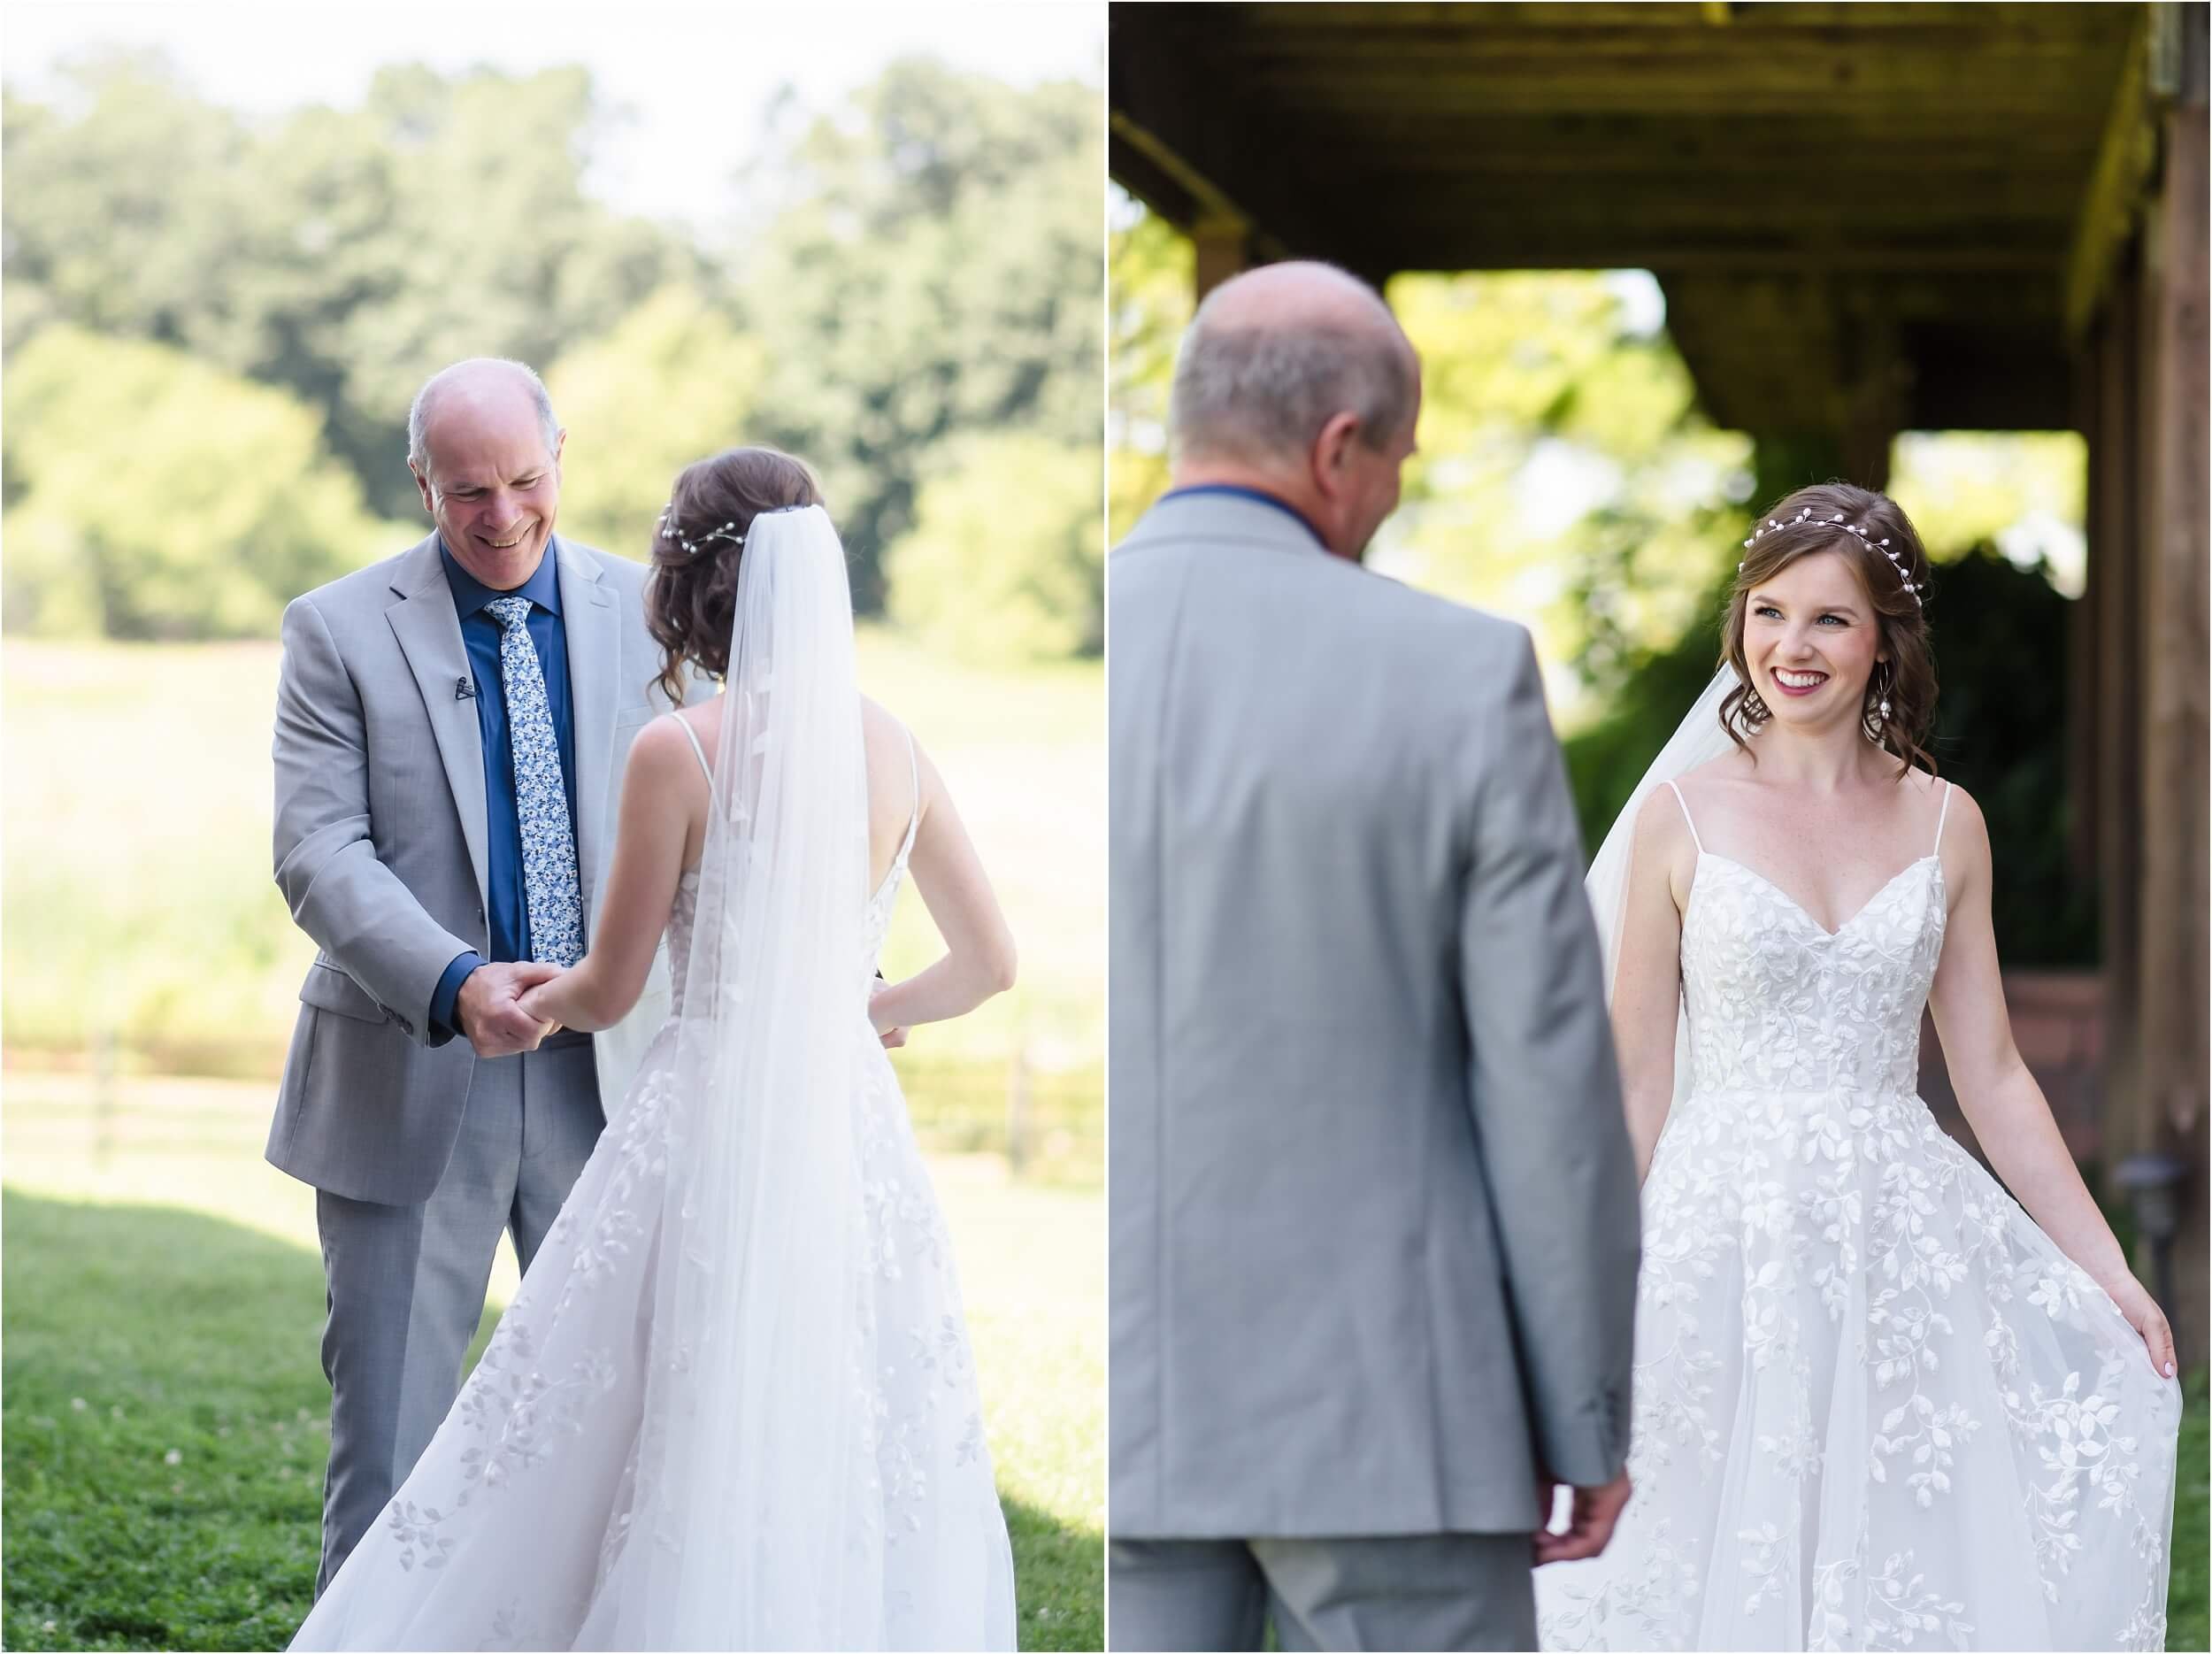  A woman has a first look with her dad before she sees her soon-to-be husband on their wedding day at a barn venue in Michigan.  